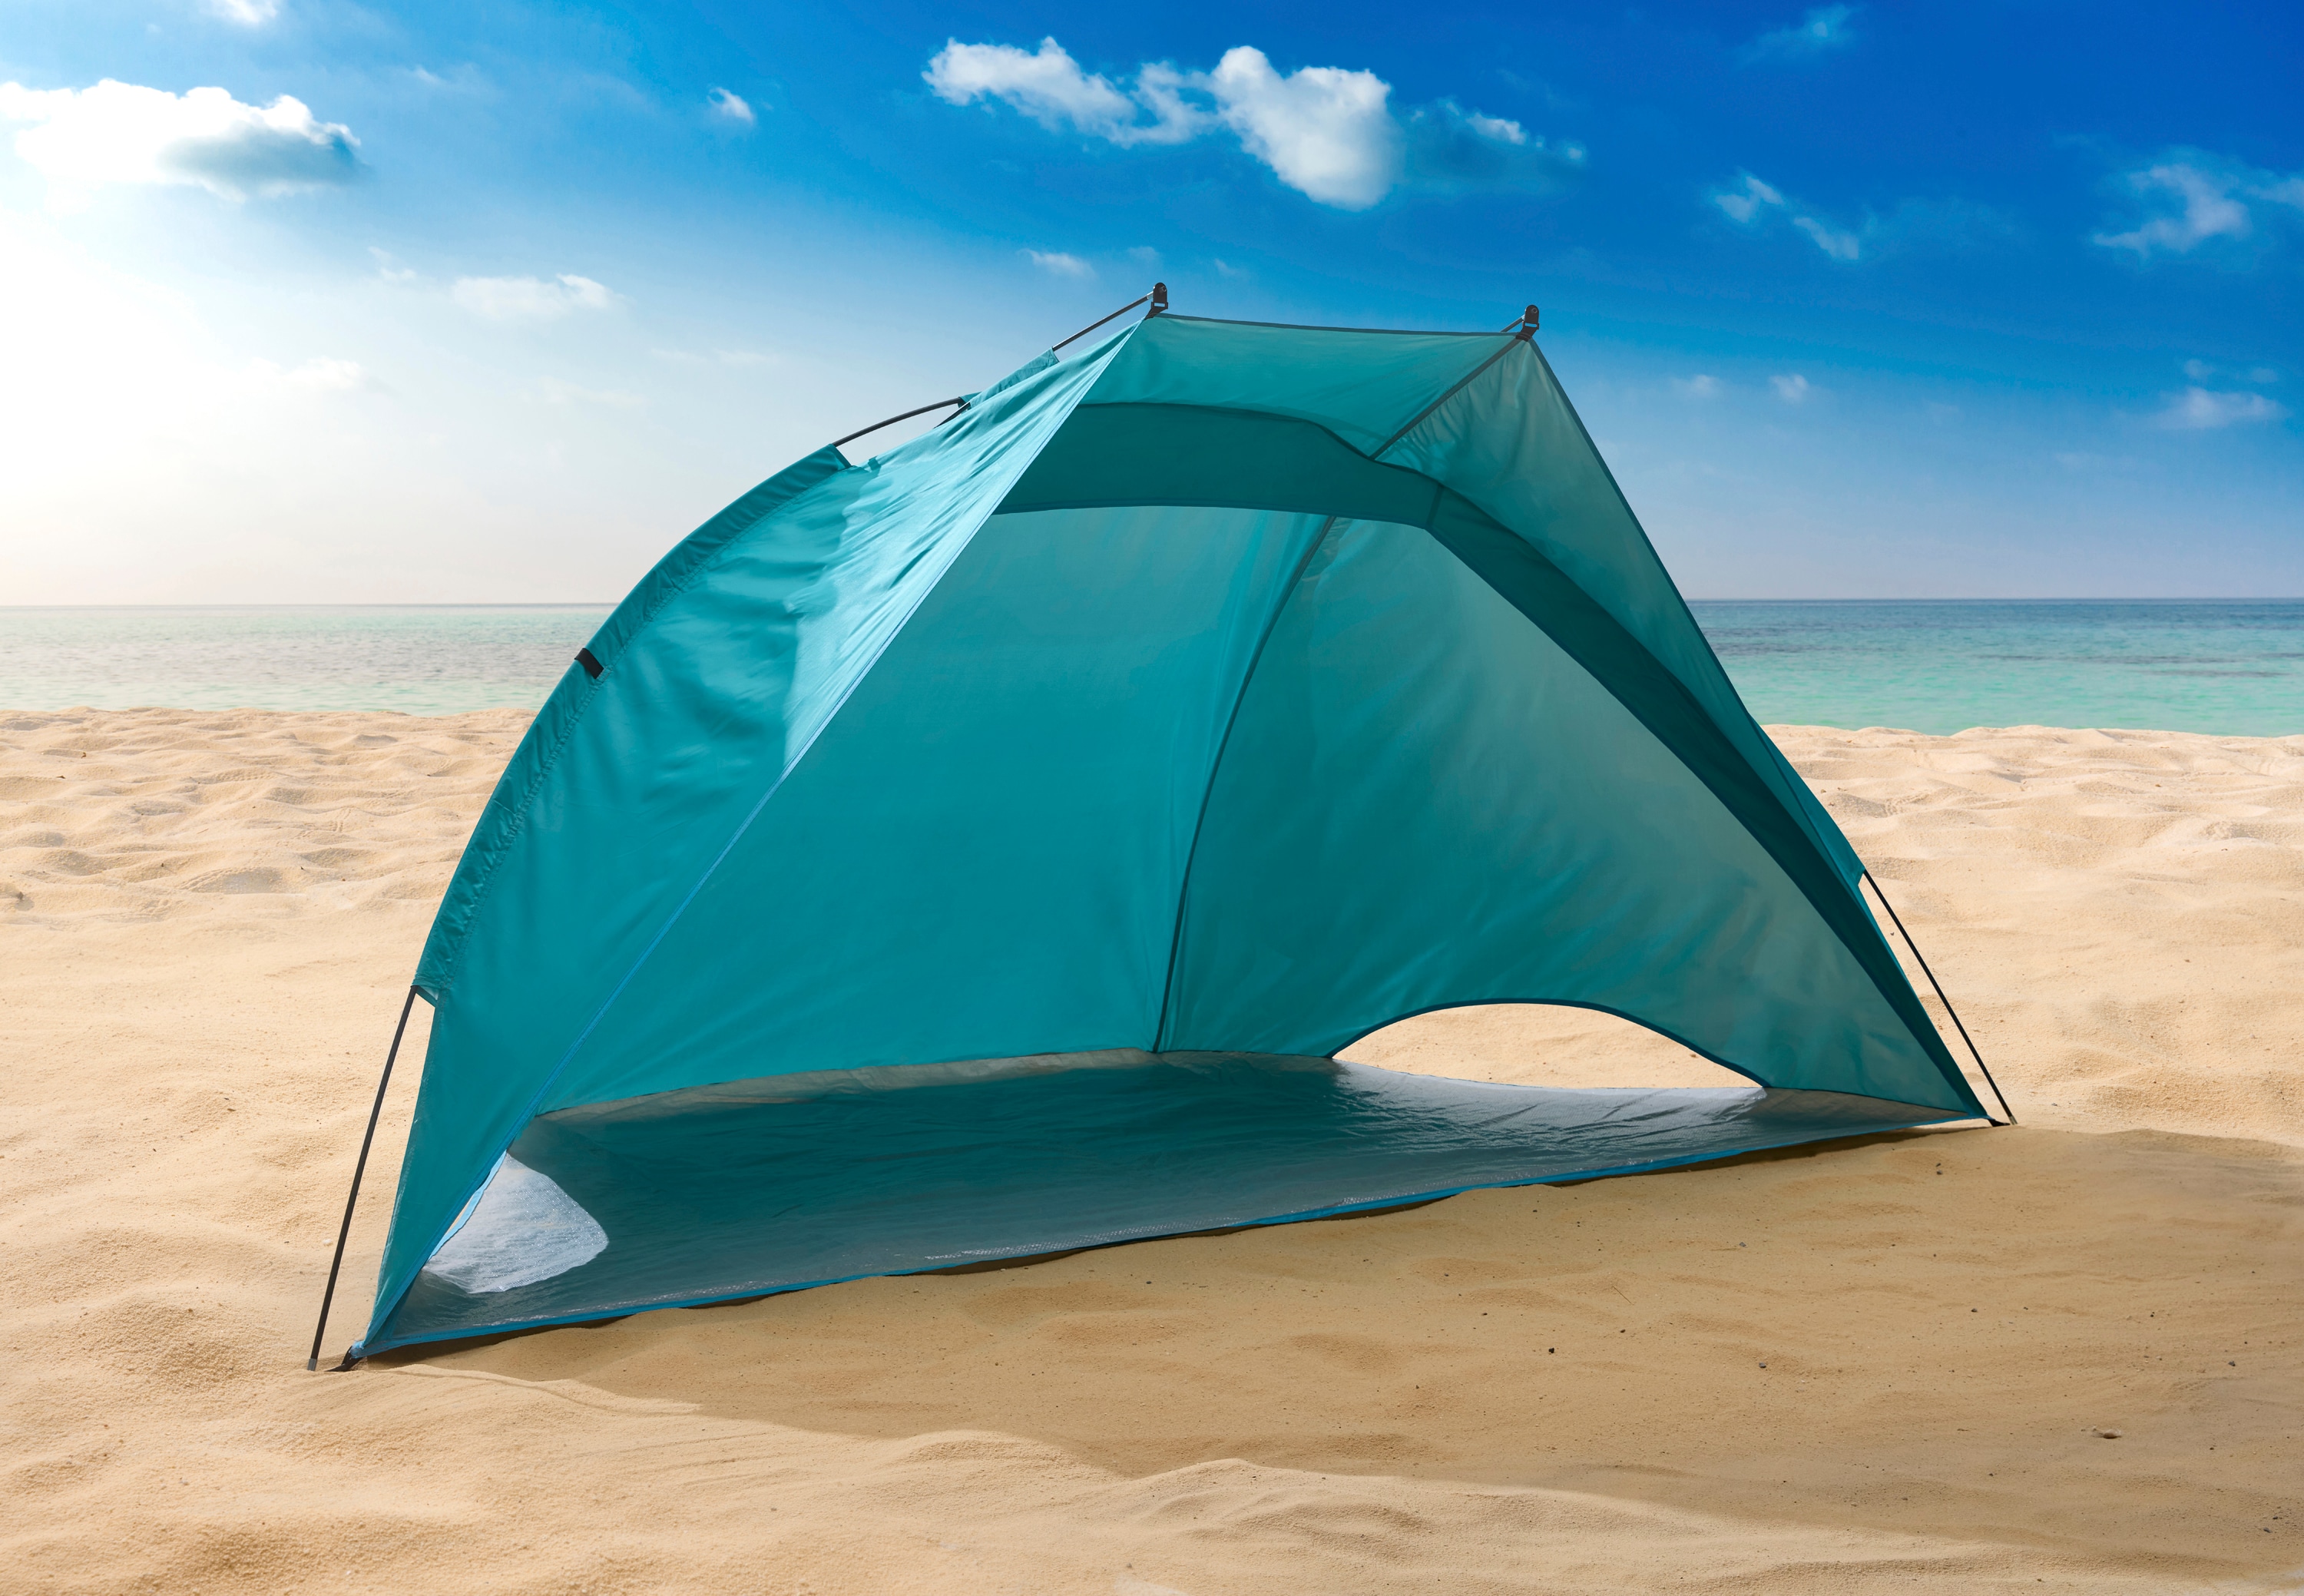 Selections Tent Polyester department 2-Person Style the at in Tents